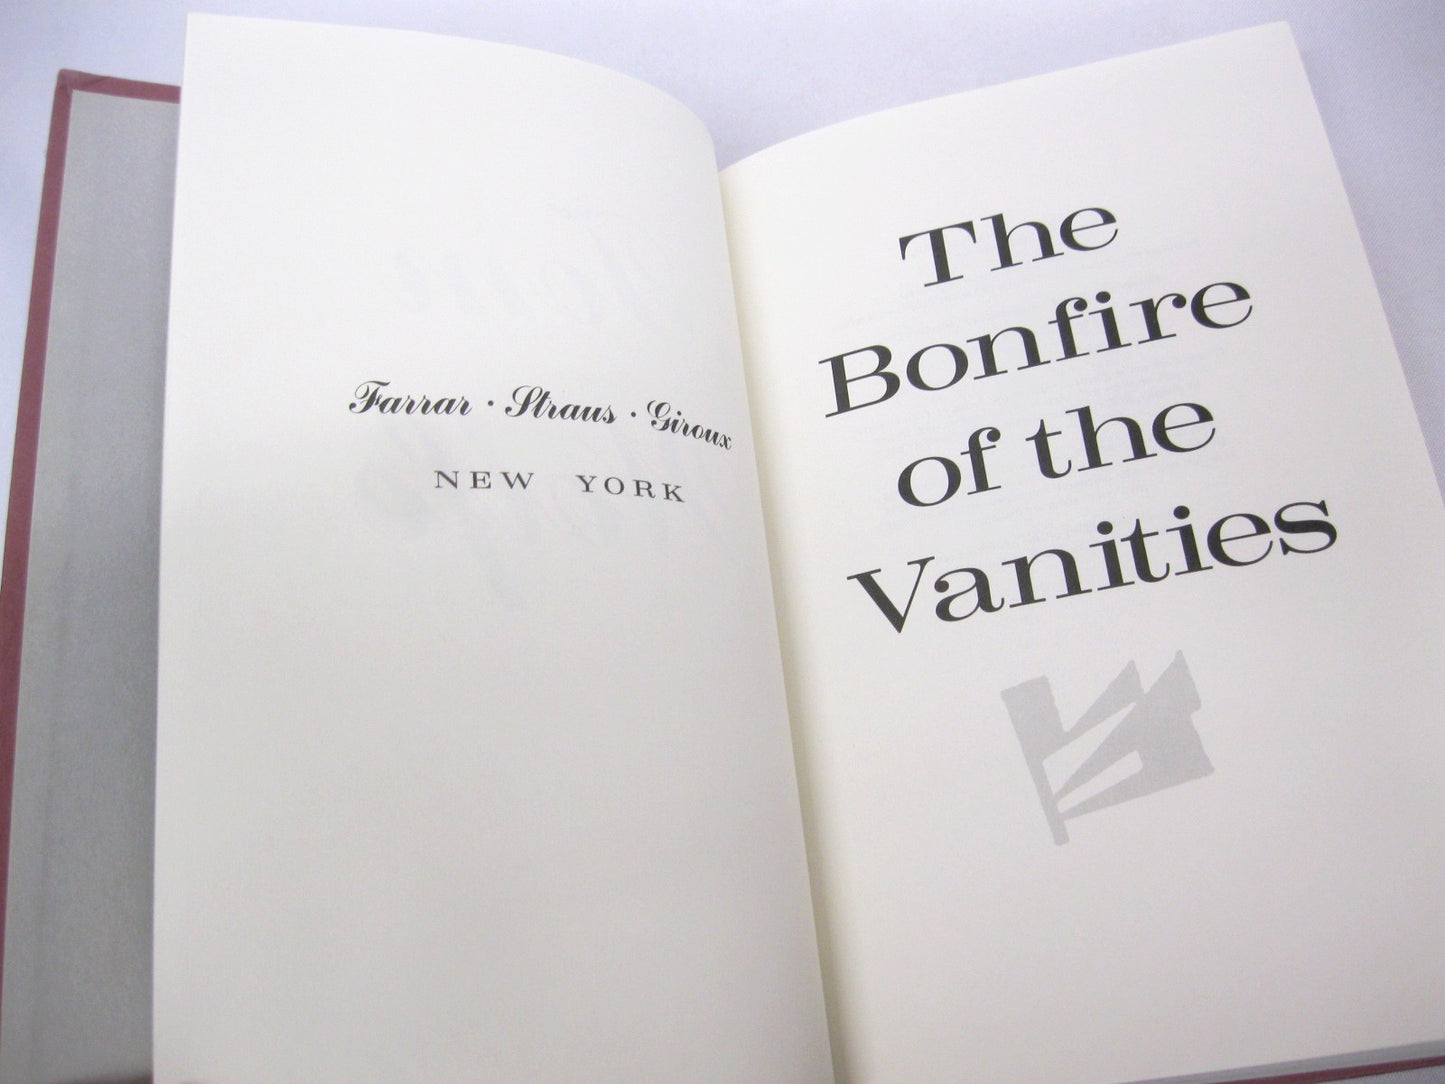 The Bonfire of the Vanities by Tom Wolfe